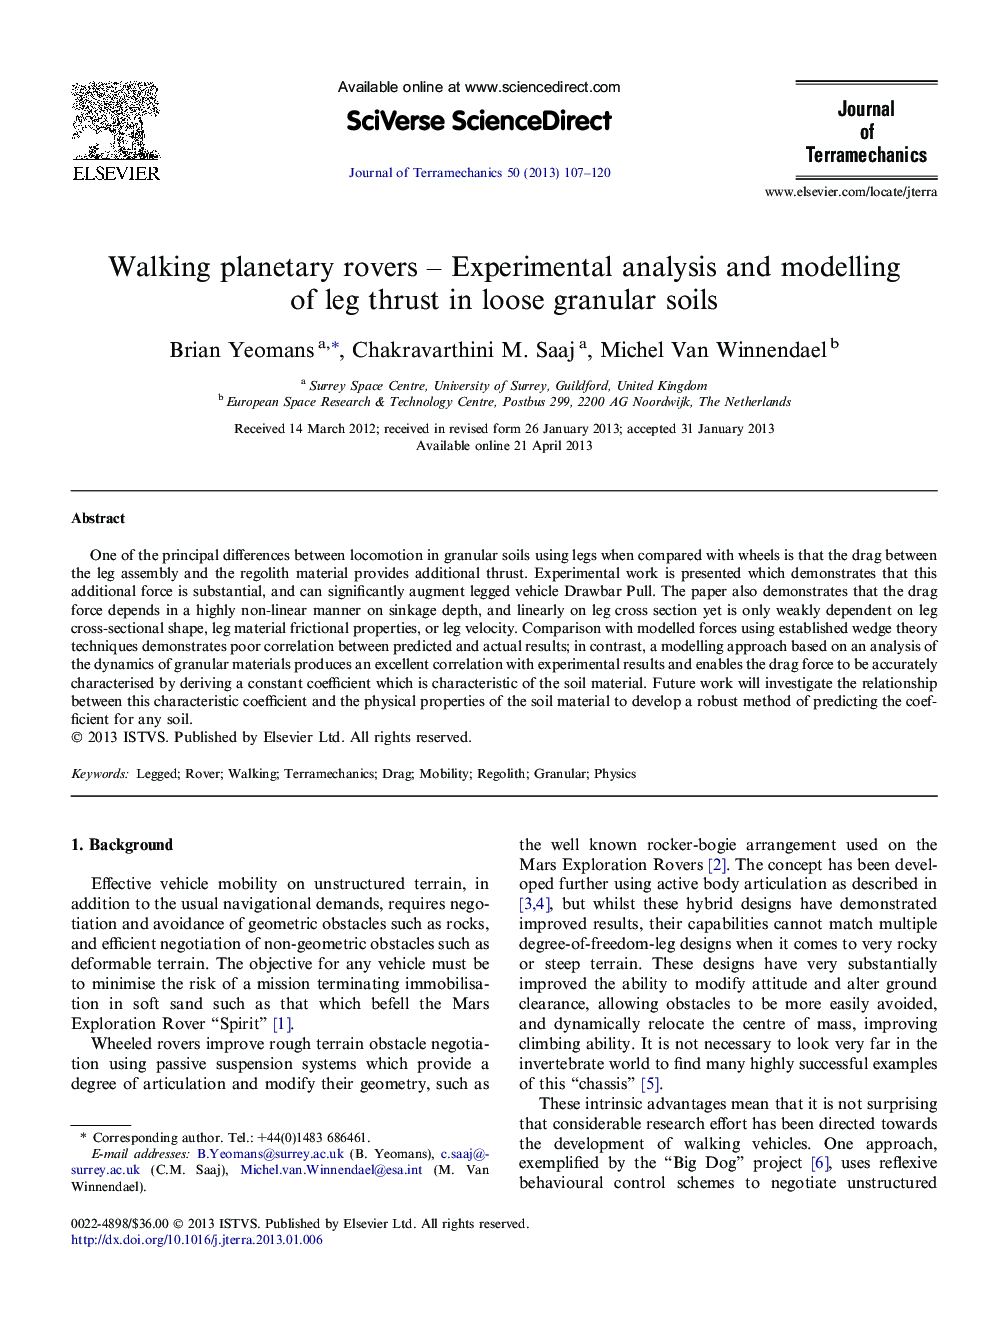 Walking planetary rovers – Experimental analysis and modelling of leg thrust in loose granular soils